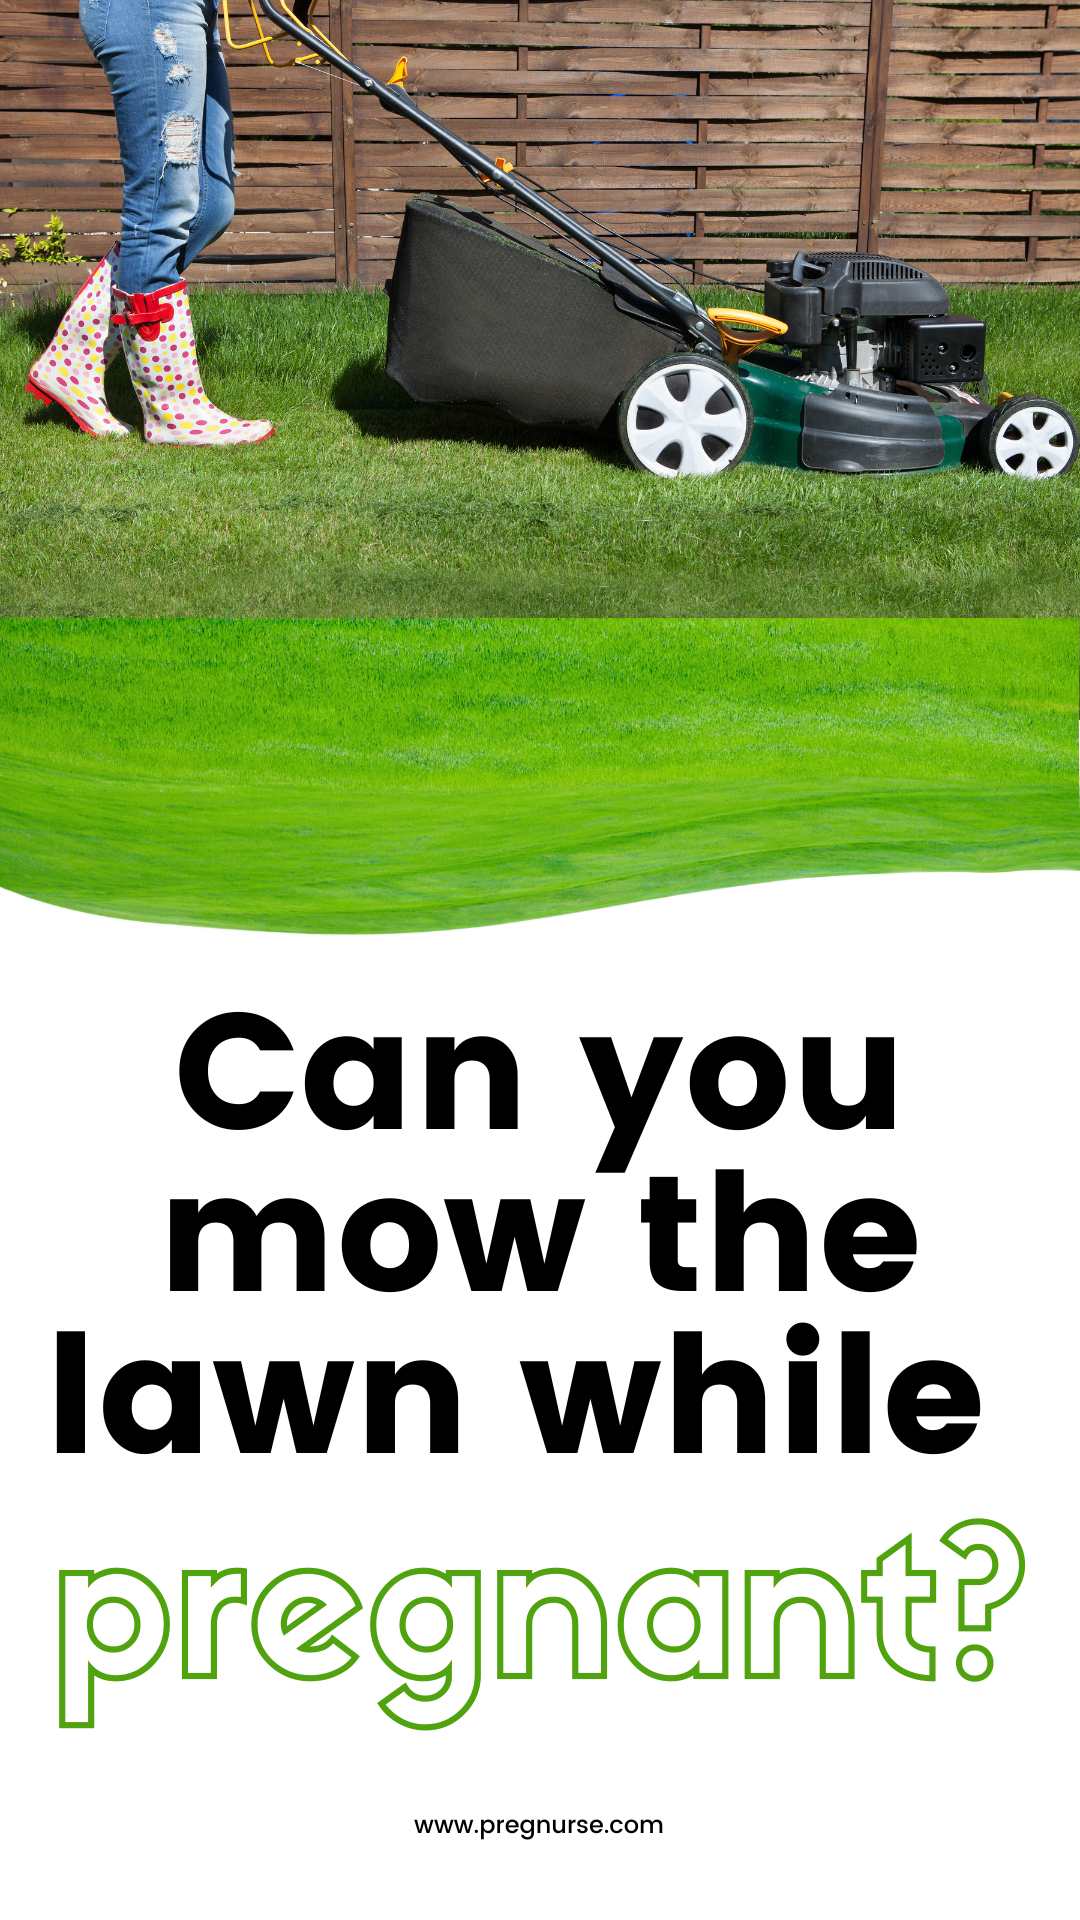 There is a lot of debate over whether or not you can mow the lawn while pregnant. Here, we take a look at both sides of the argument and let you decide what is best for you and your pregnancy.